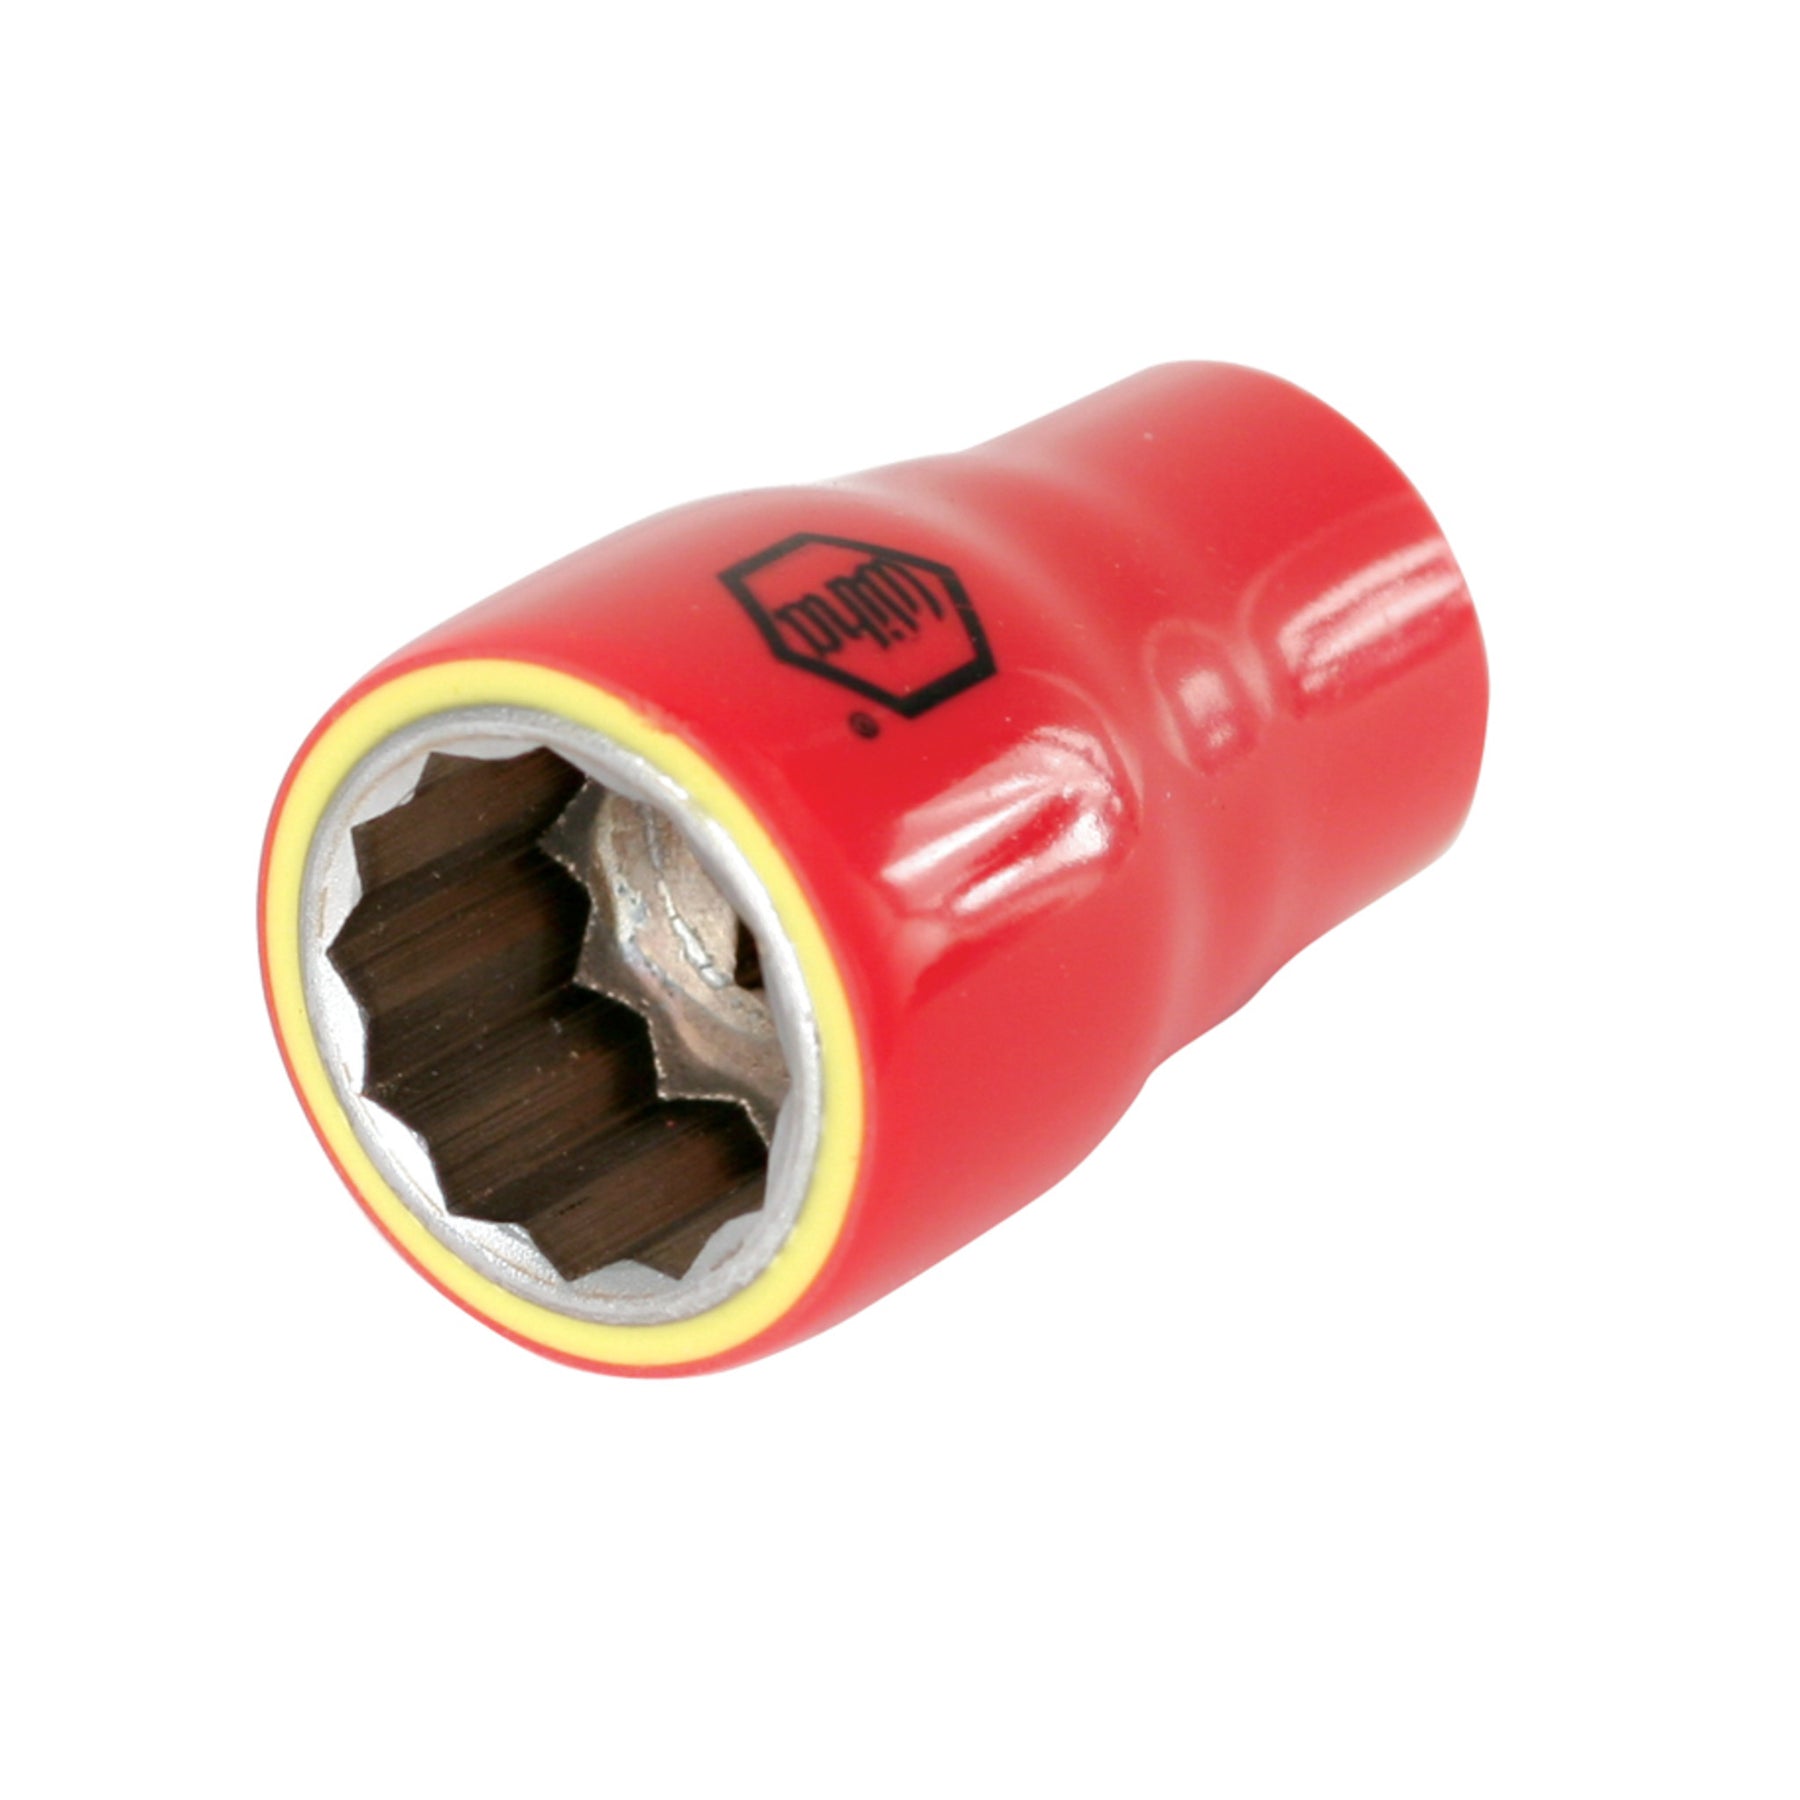 Insulated Socket 1/2" Drive 15mm